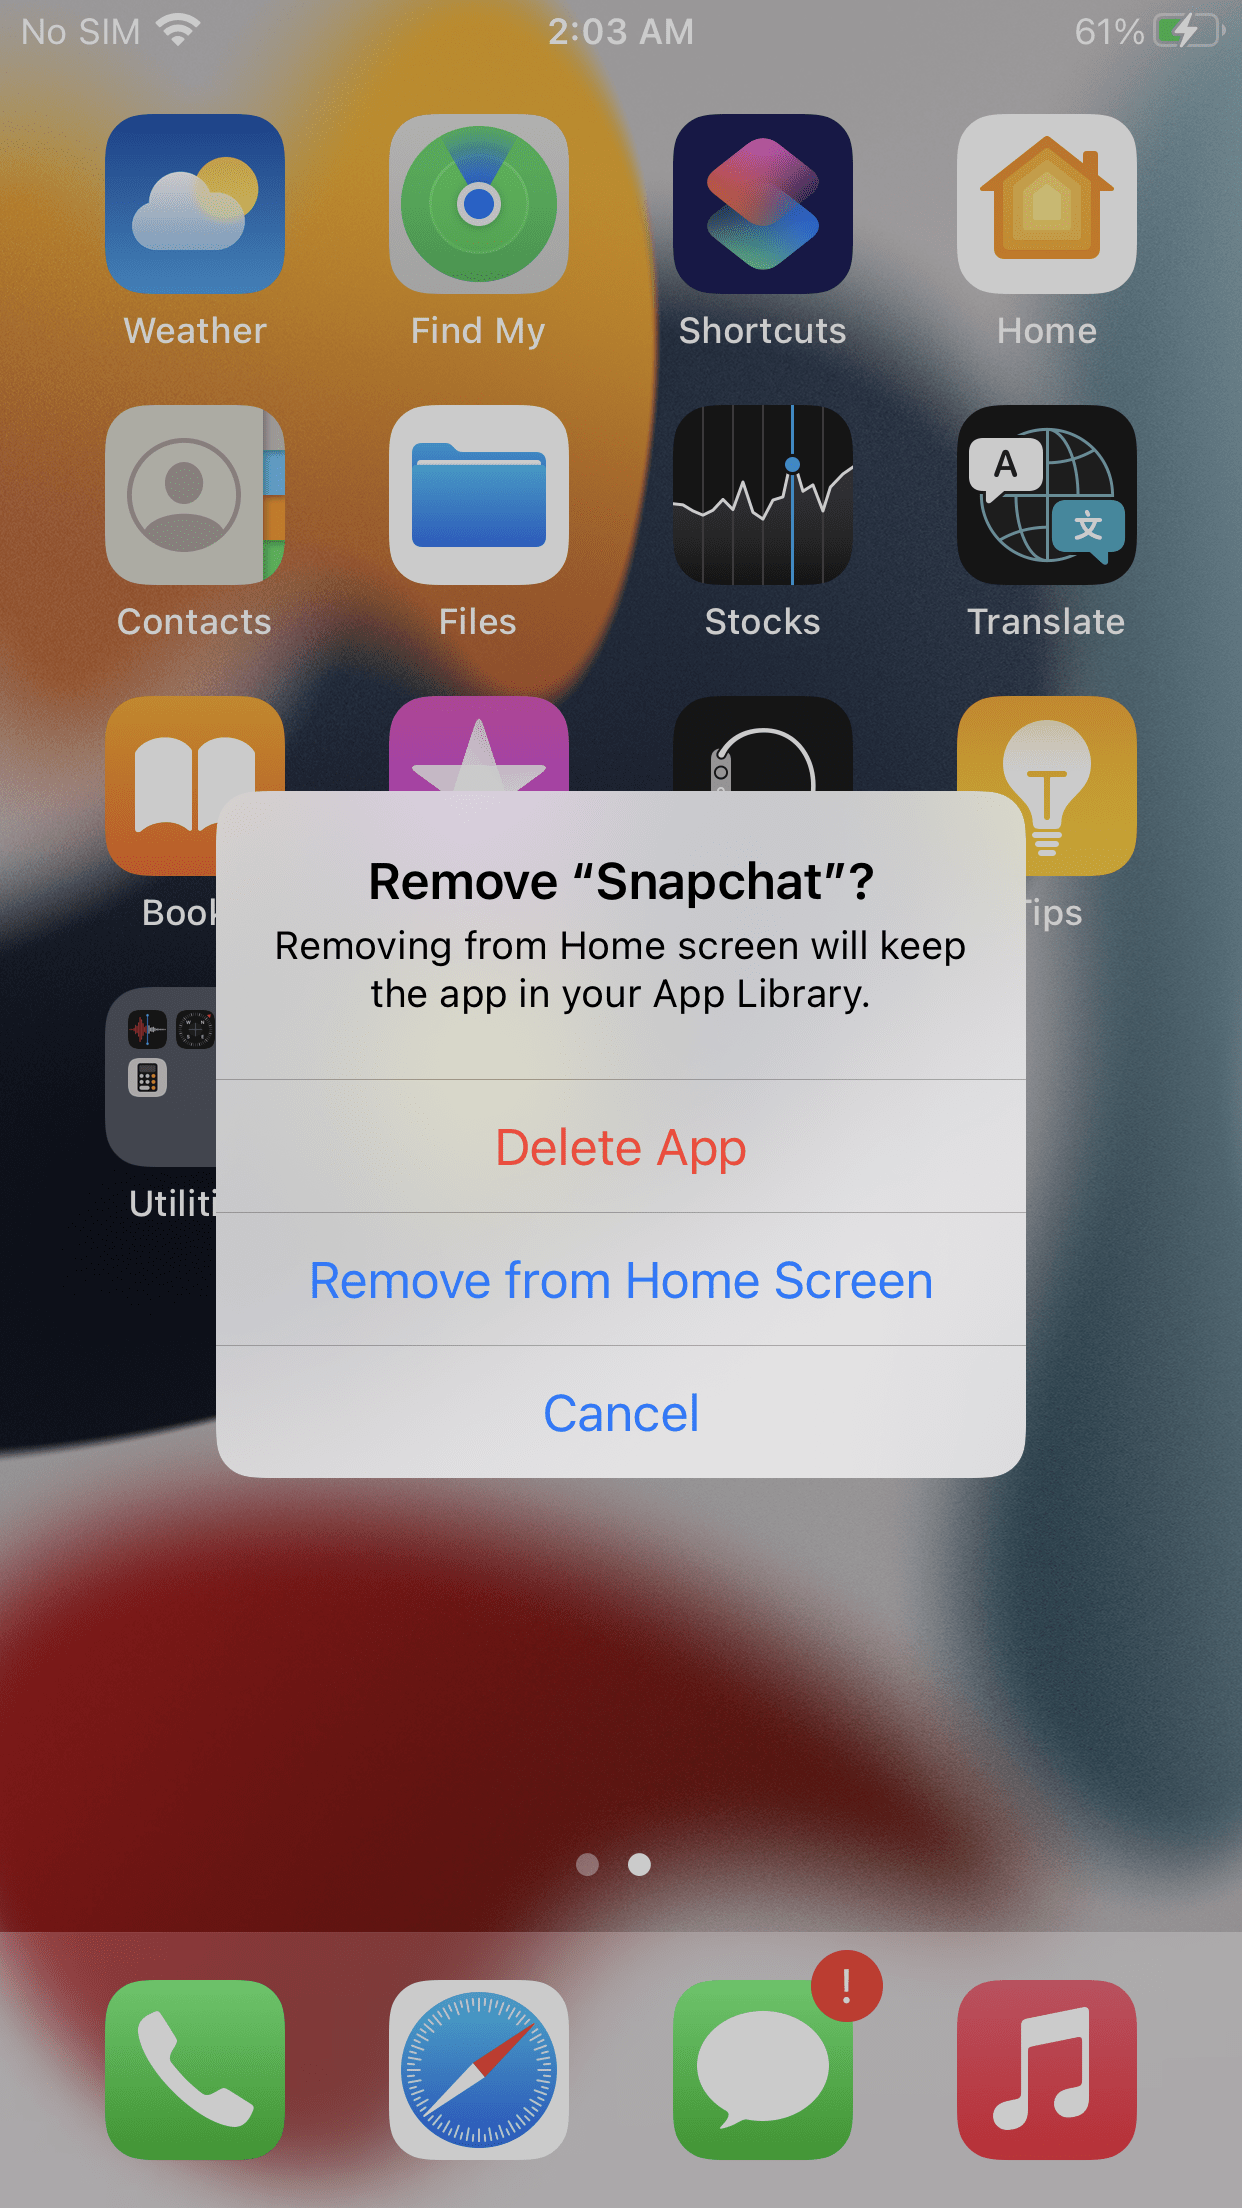 How to FIX Snapchat Blocked Network Error Message on iPhone?